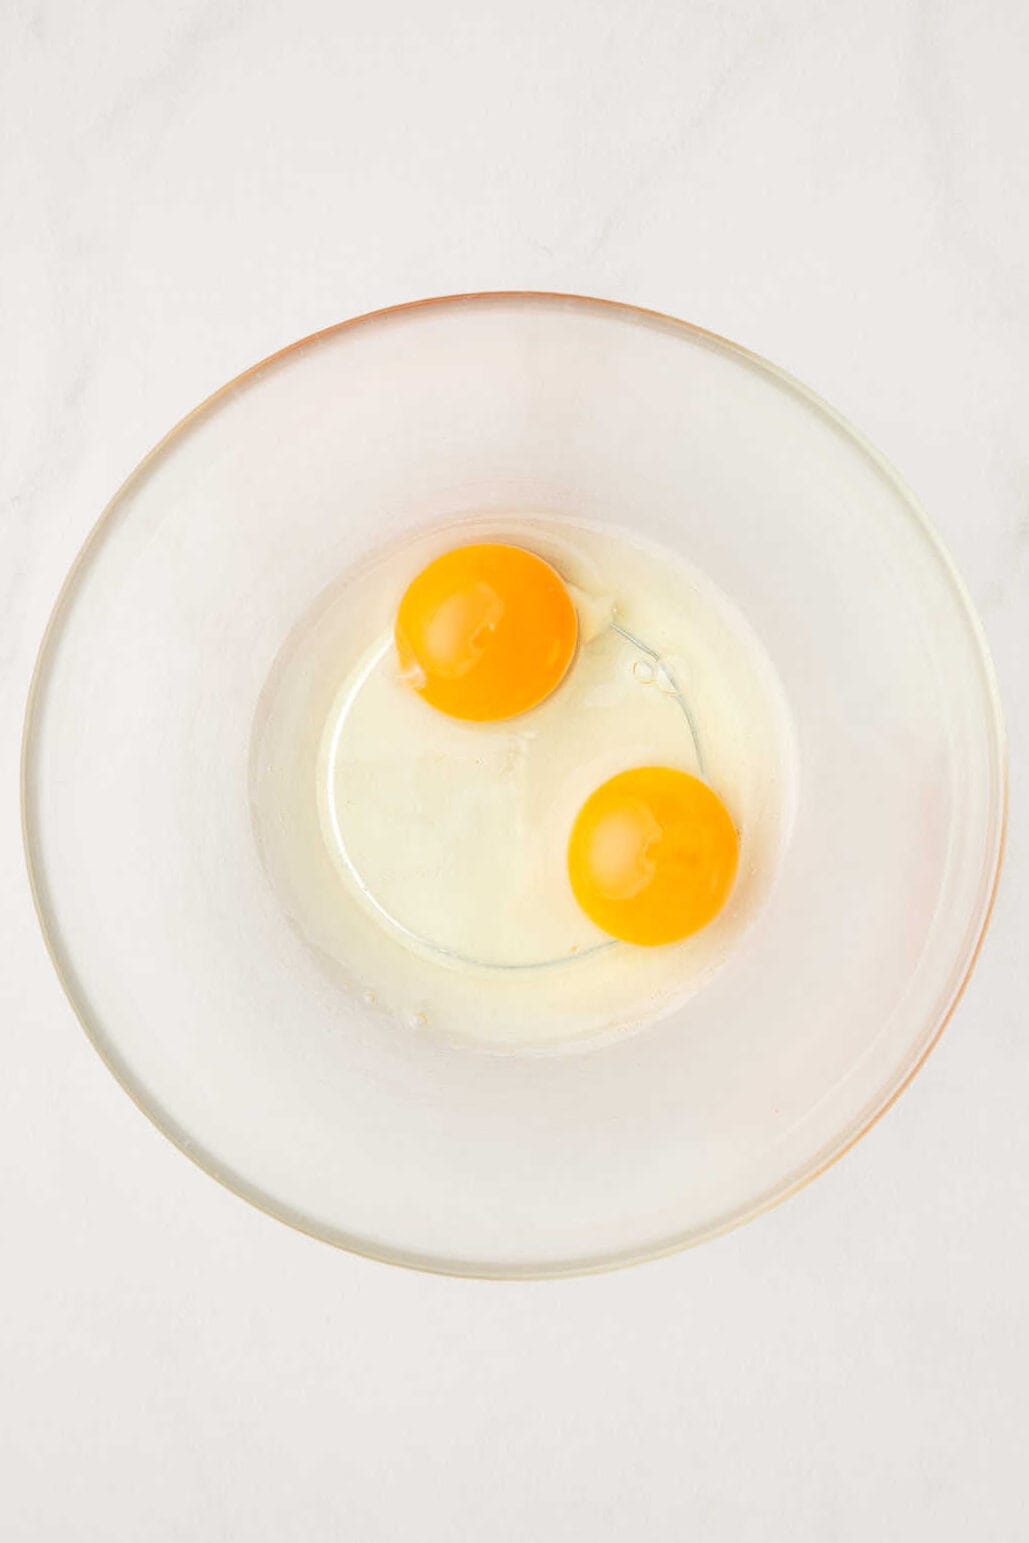 2 raw eggs in a large glass bowl.